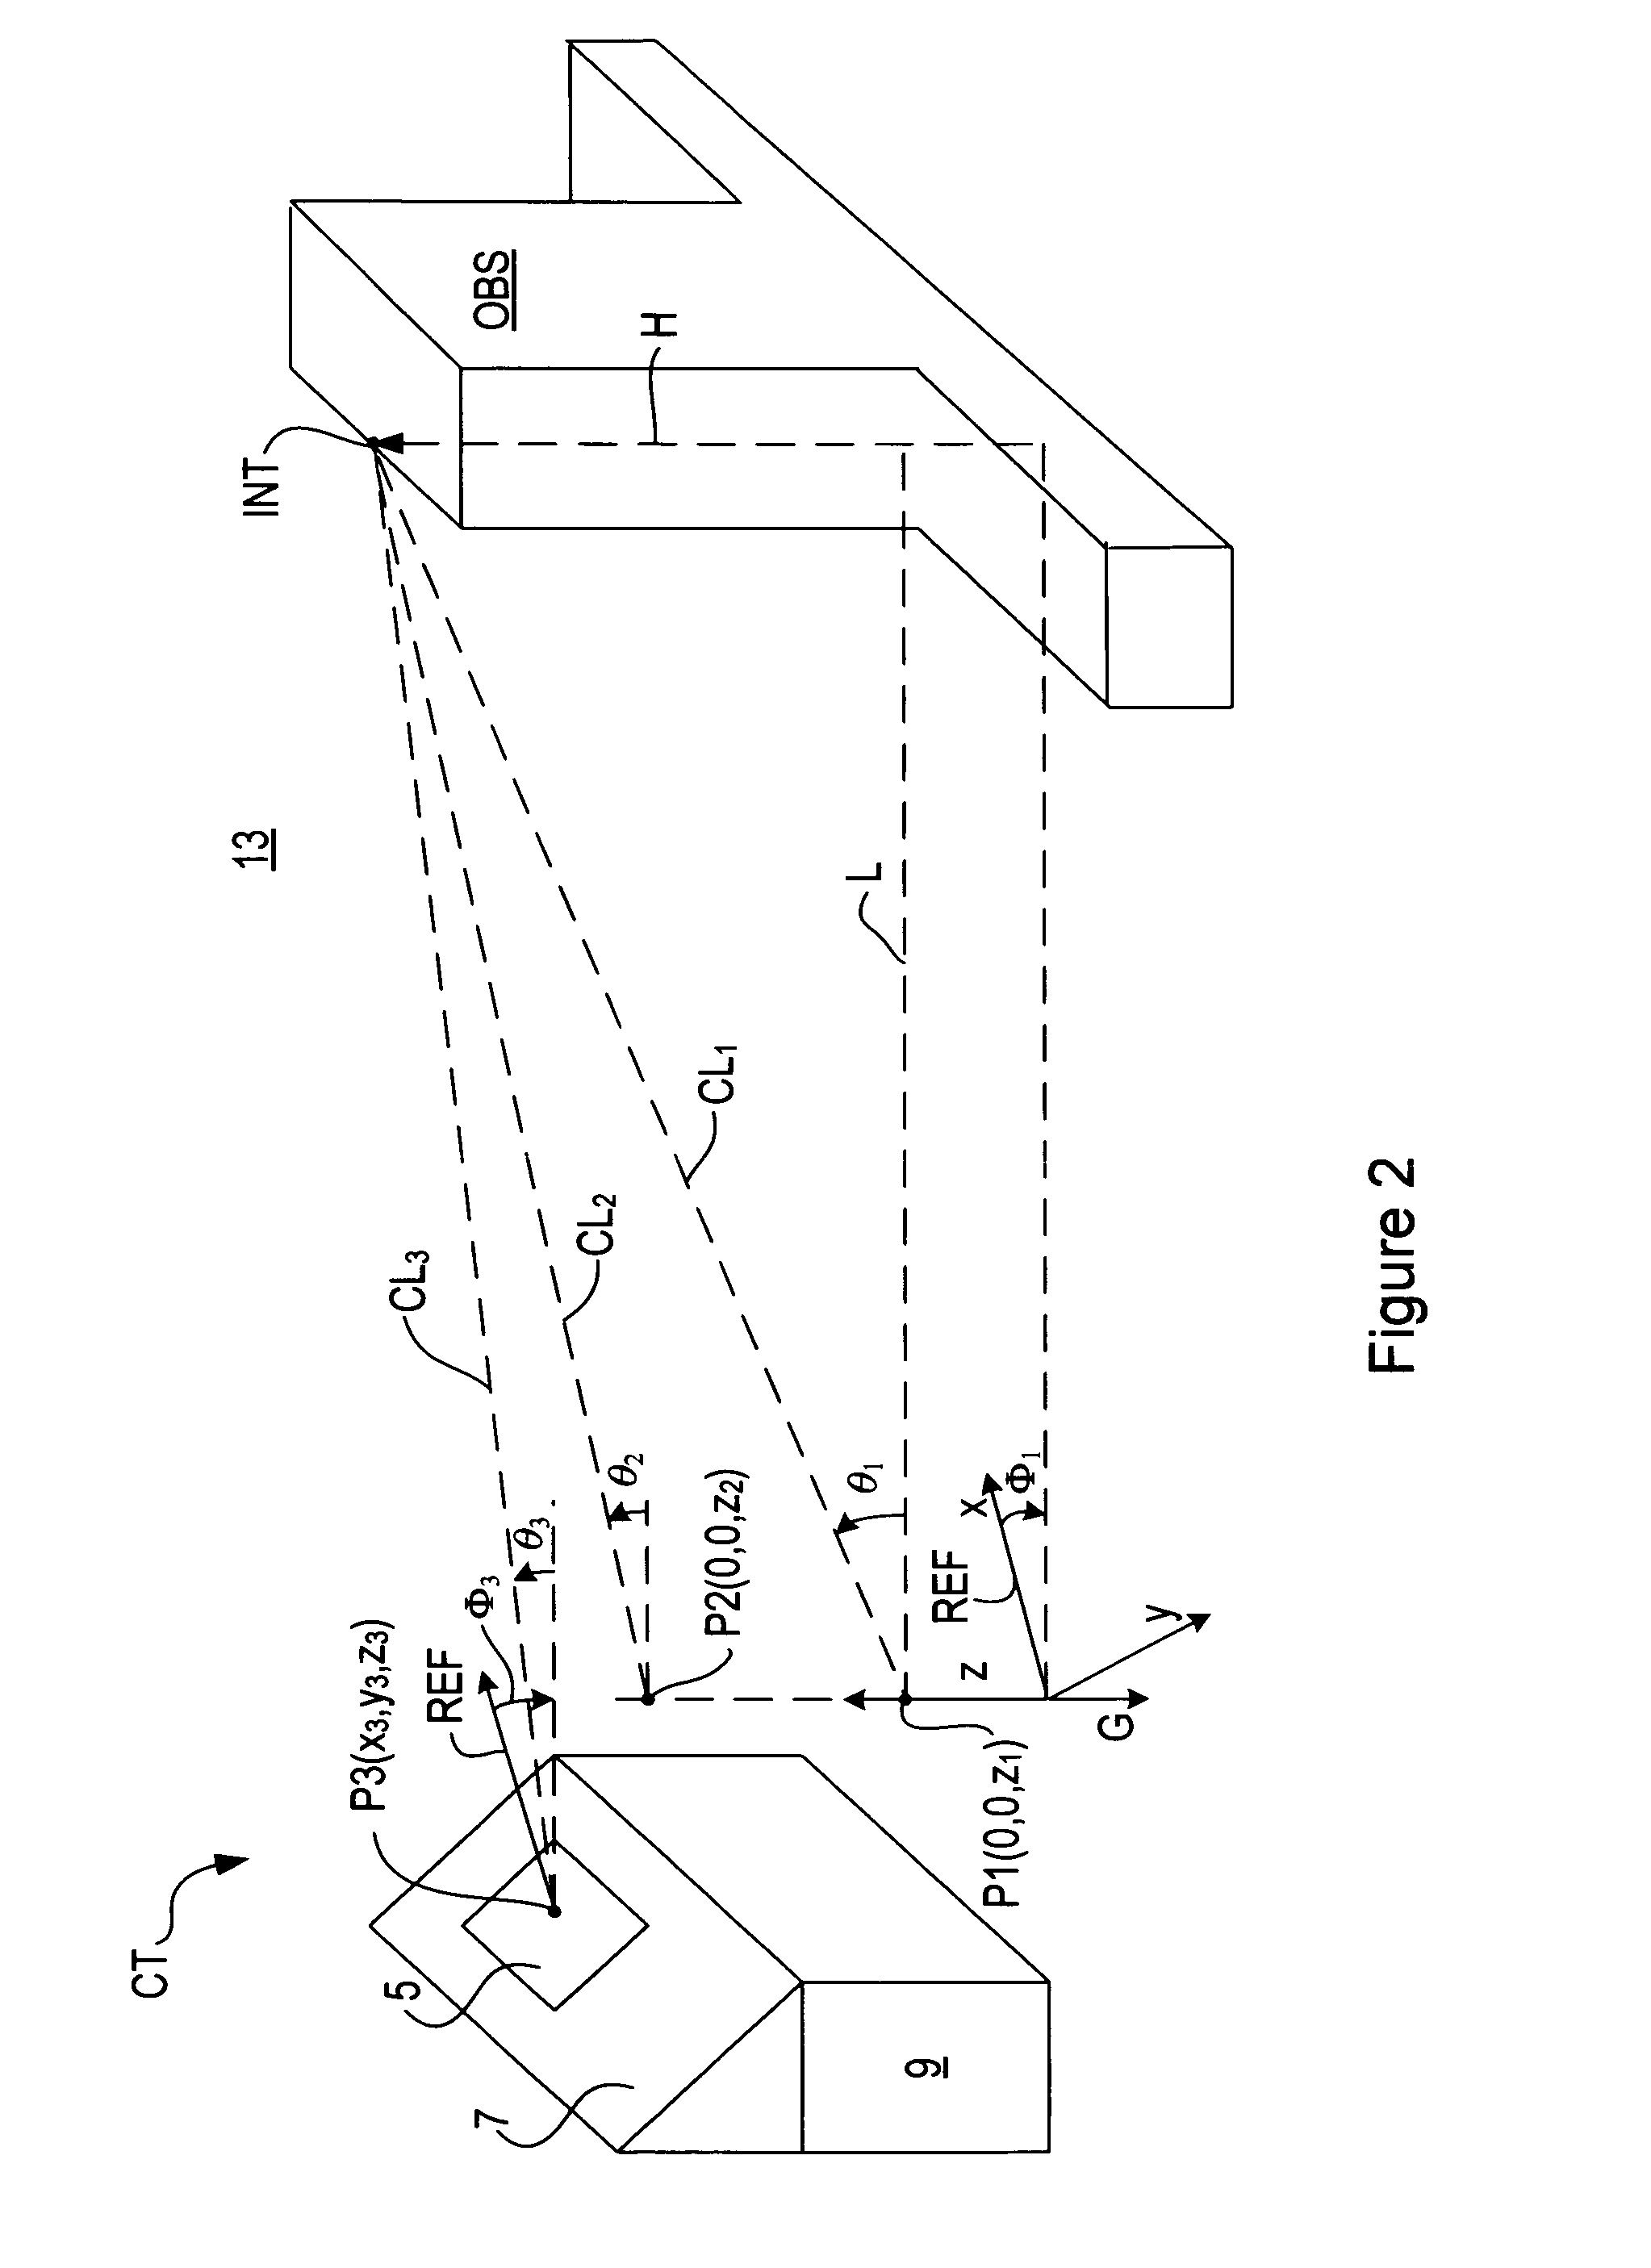 Extrapolation system for solar access determination